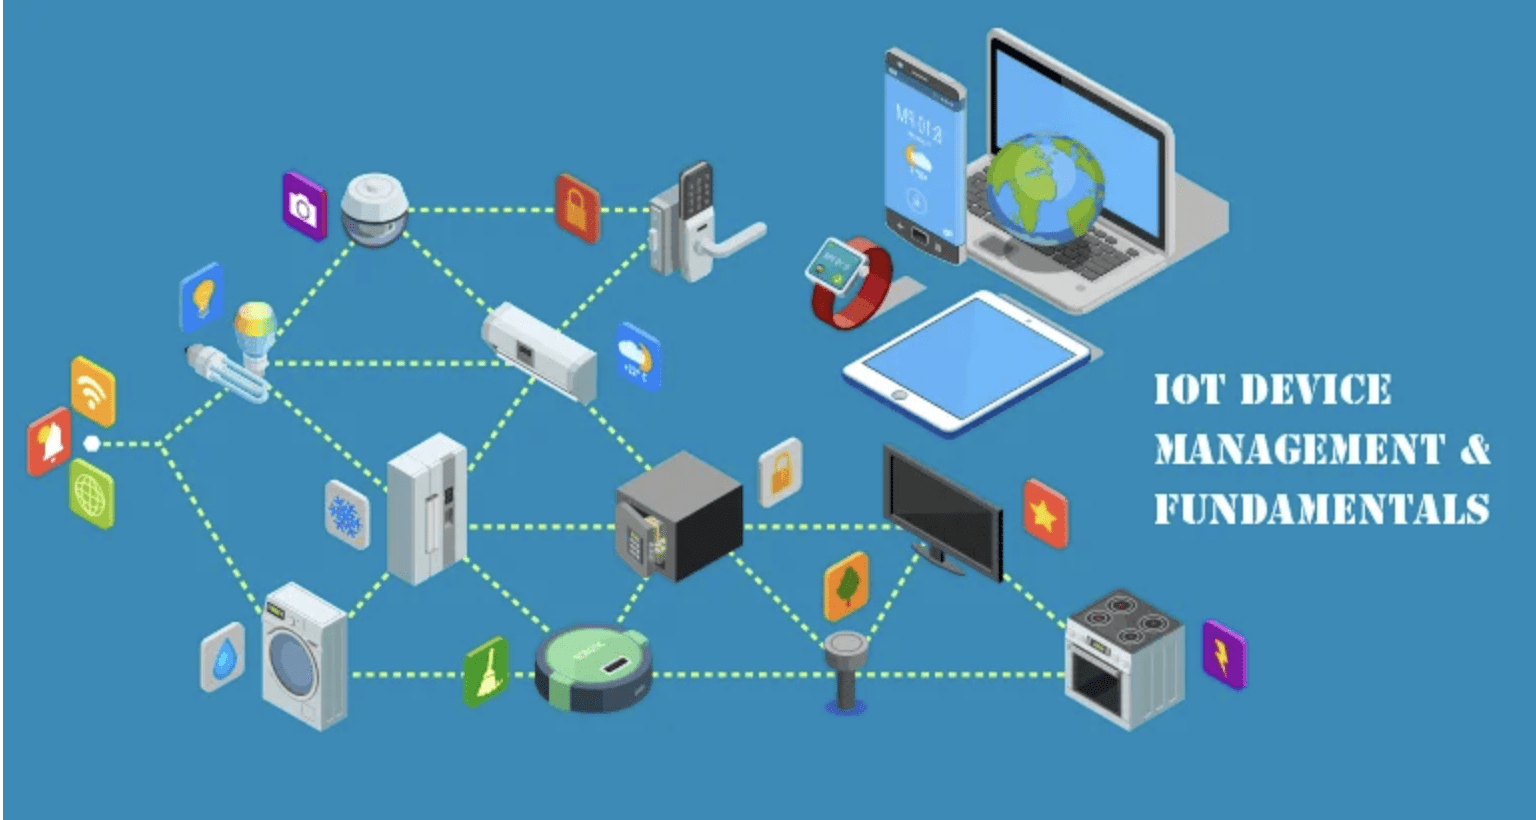 What is IoT Device Management? Importance & Fundamentals